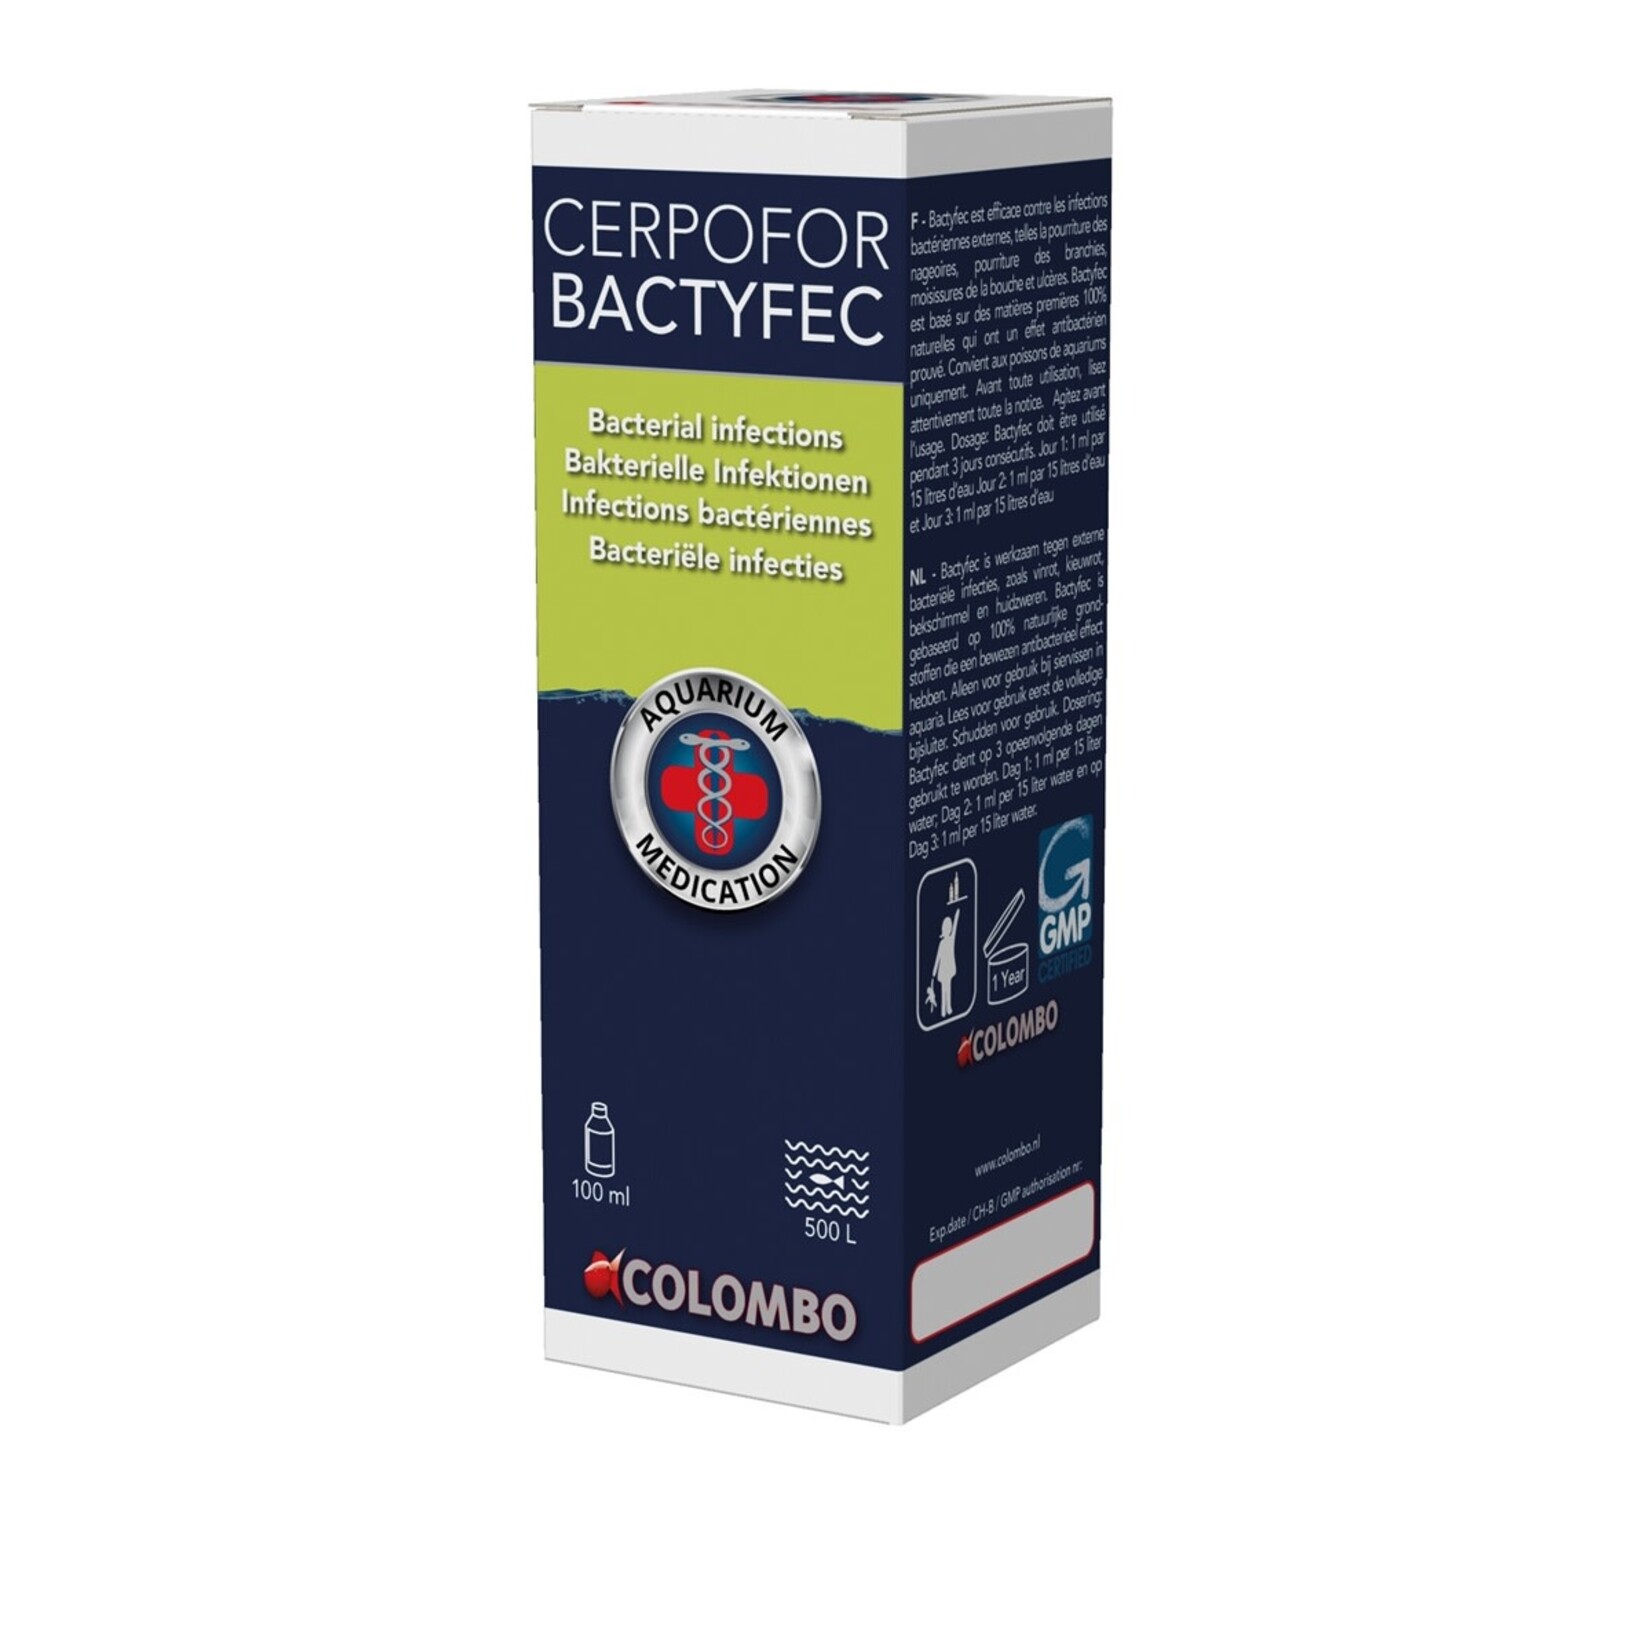 Cerpofor bactyfec 100ml / 500l